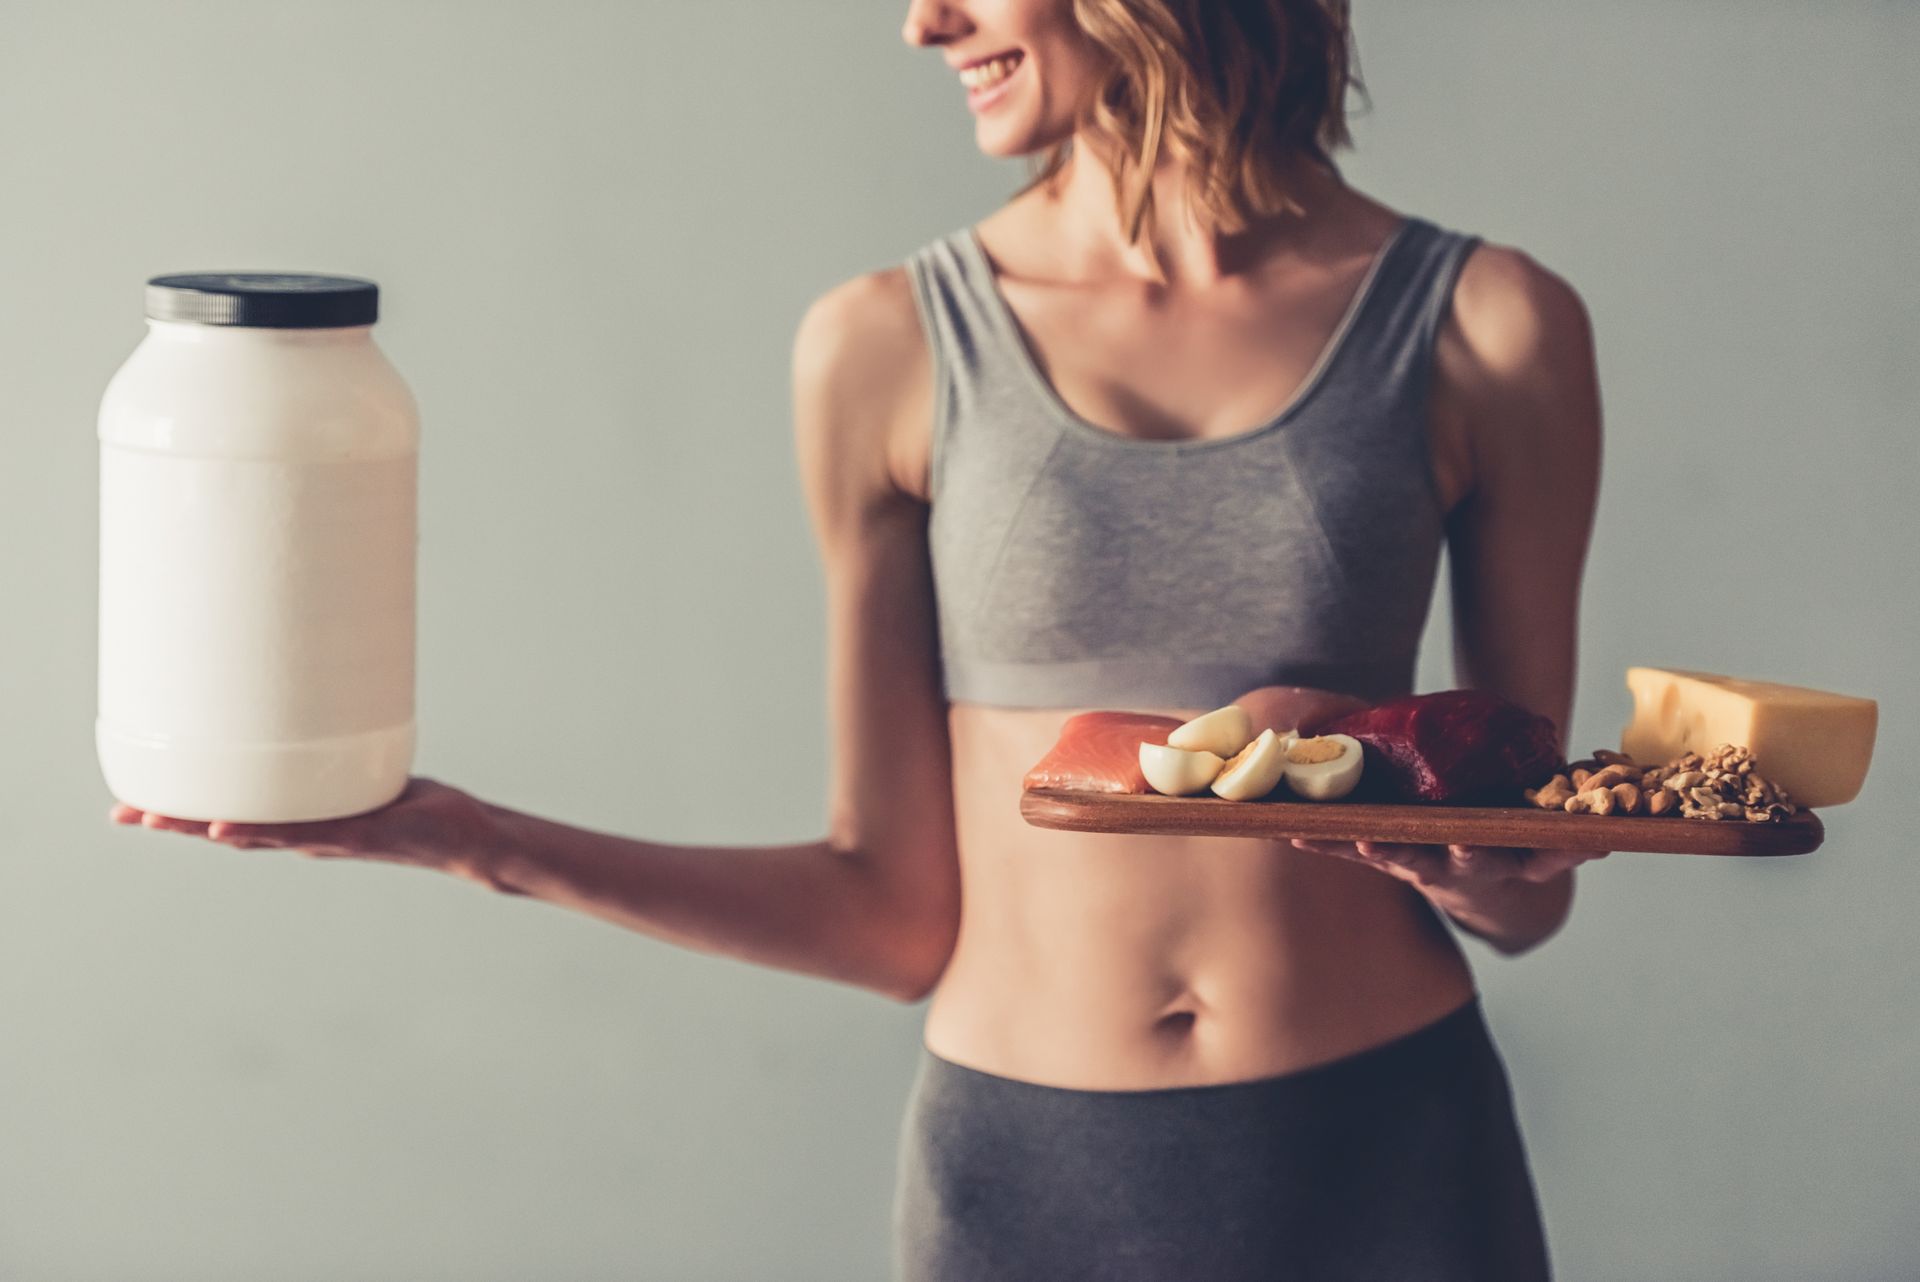 Athletic woman comparing a tray of protein food to a plastic jar of protein powder.